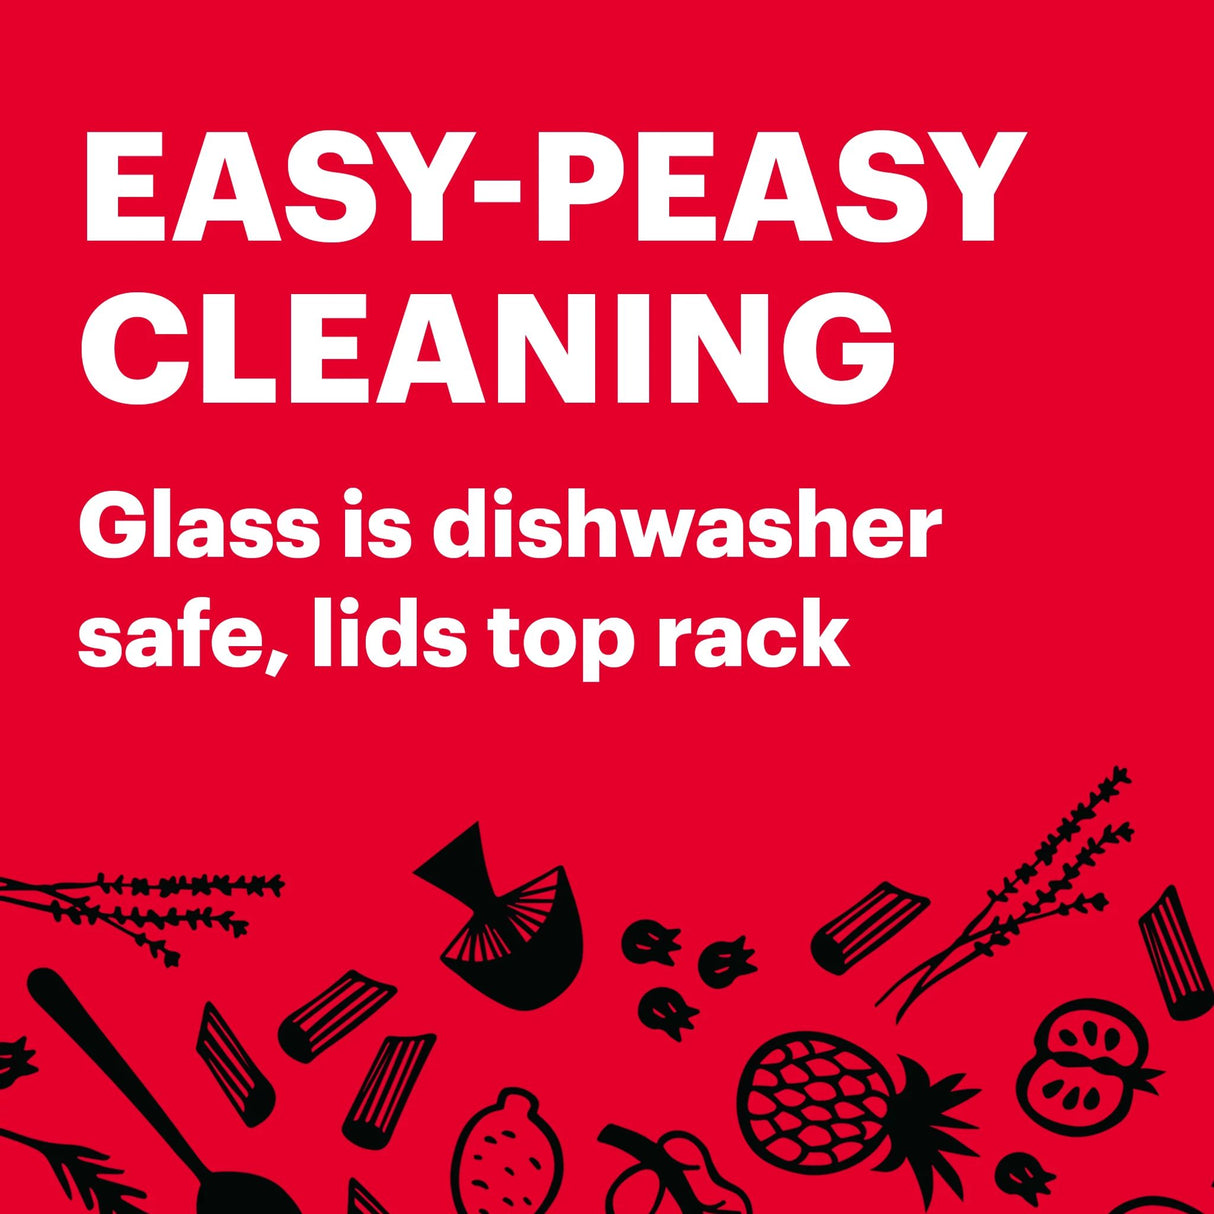  text easy-peasy glass is dishwasher safe, lids top rack